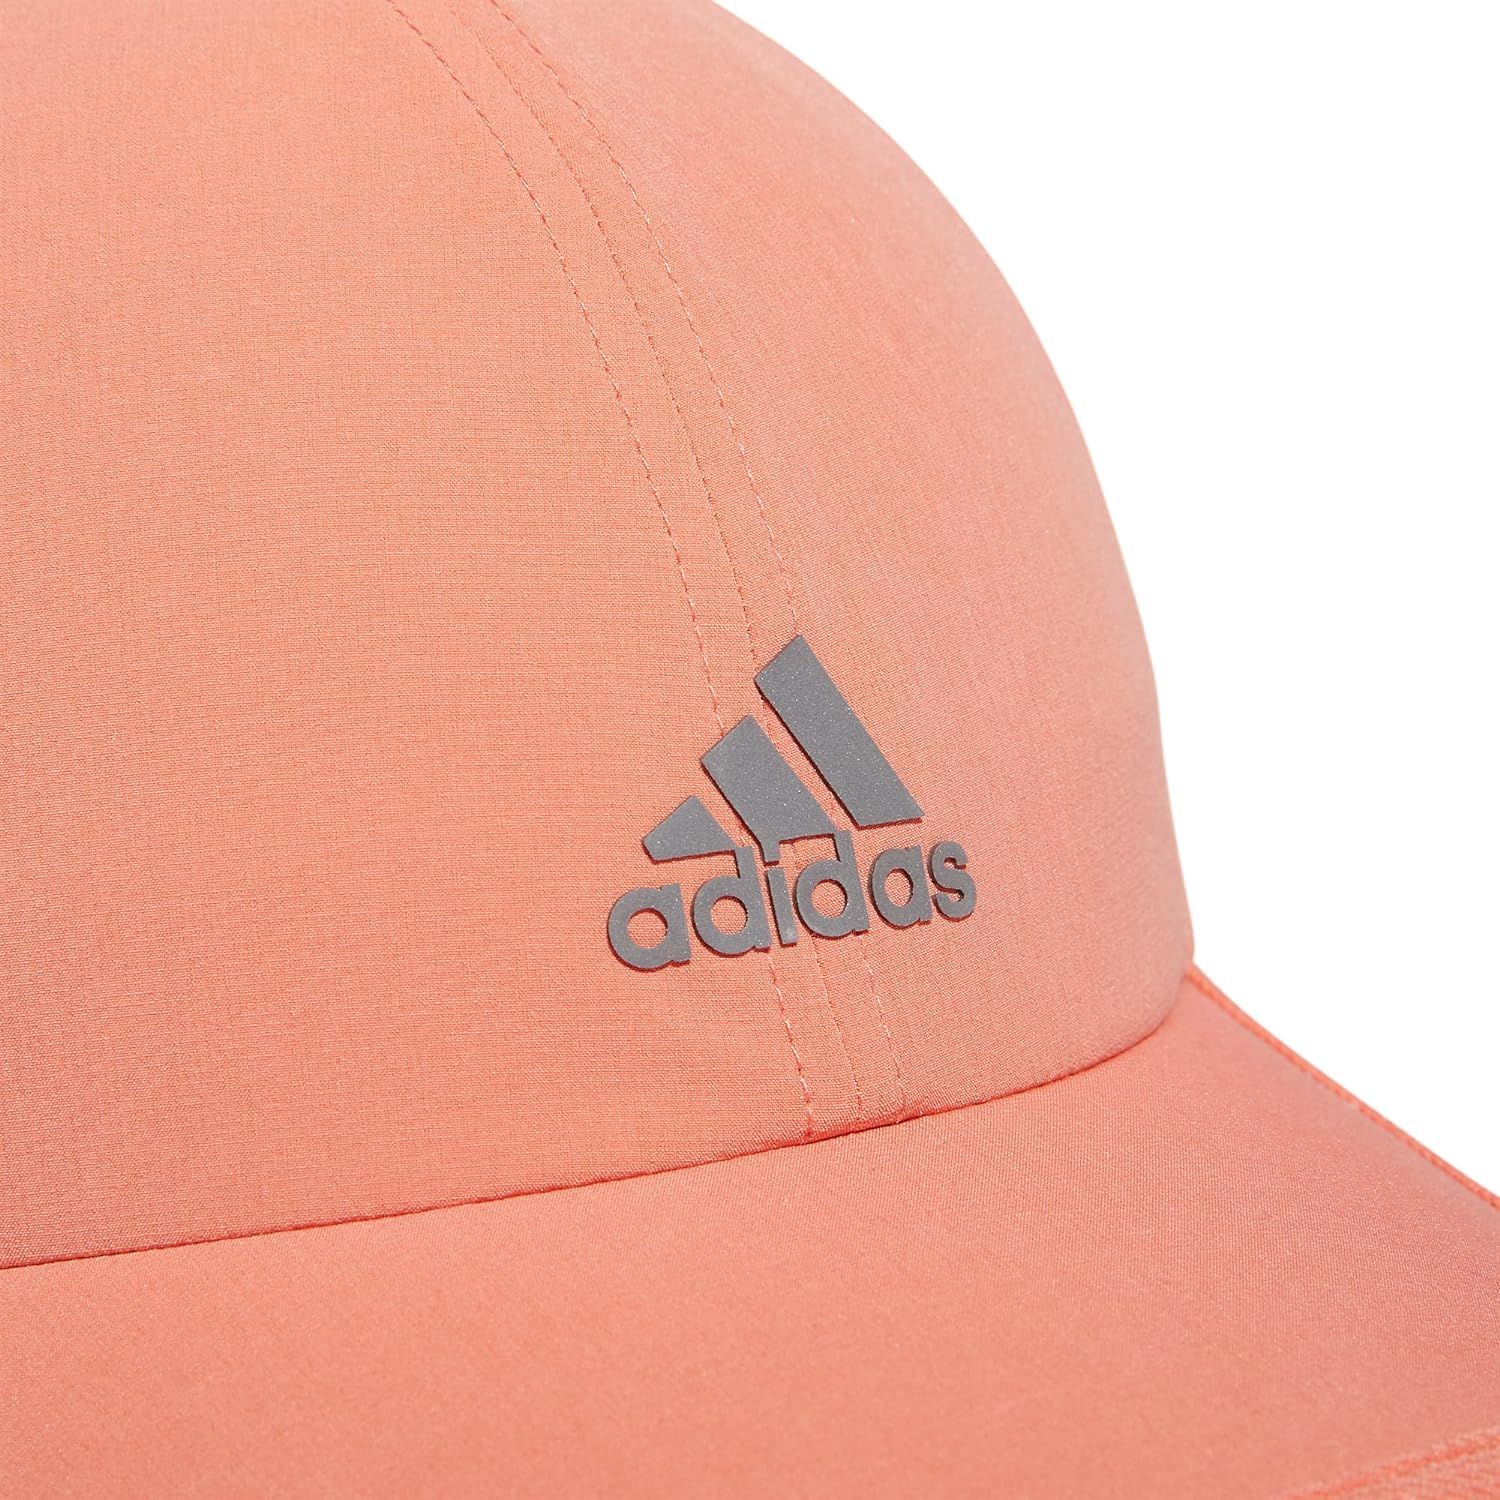 adidas Women's Superlite Relaxed Fit Performance Hat | Amazon (US)